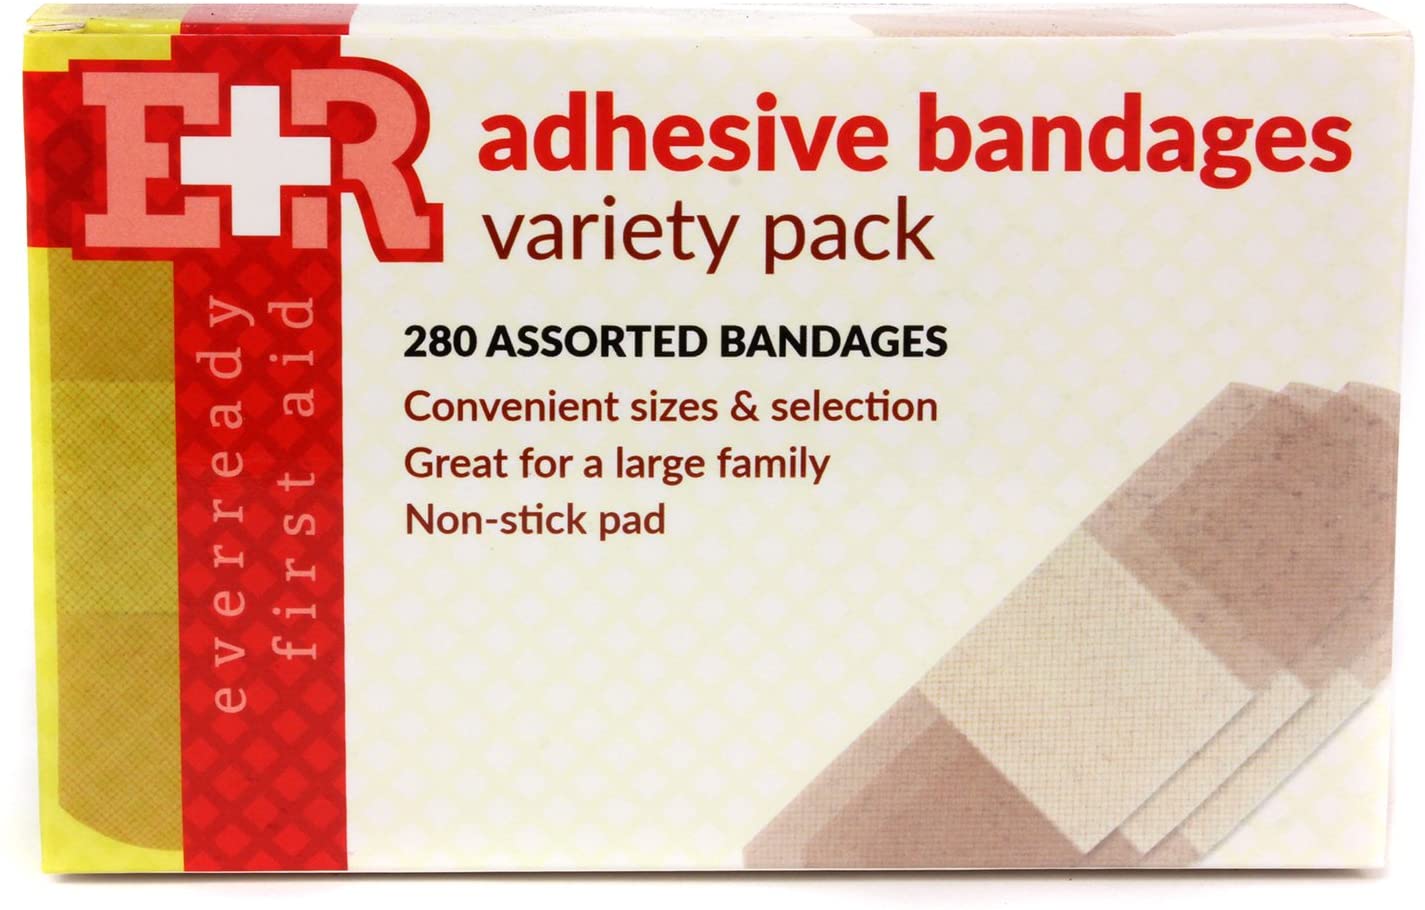 Ever Ready First Aid Quality Adhesive Bandages, Variety Pack of 280 Assorted Bandages